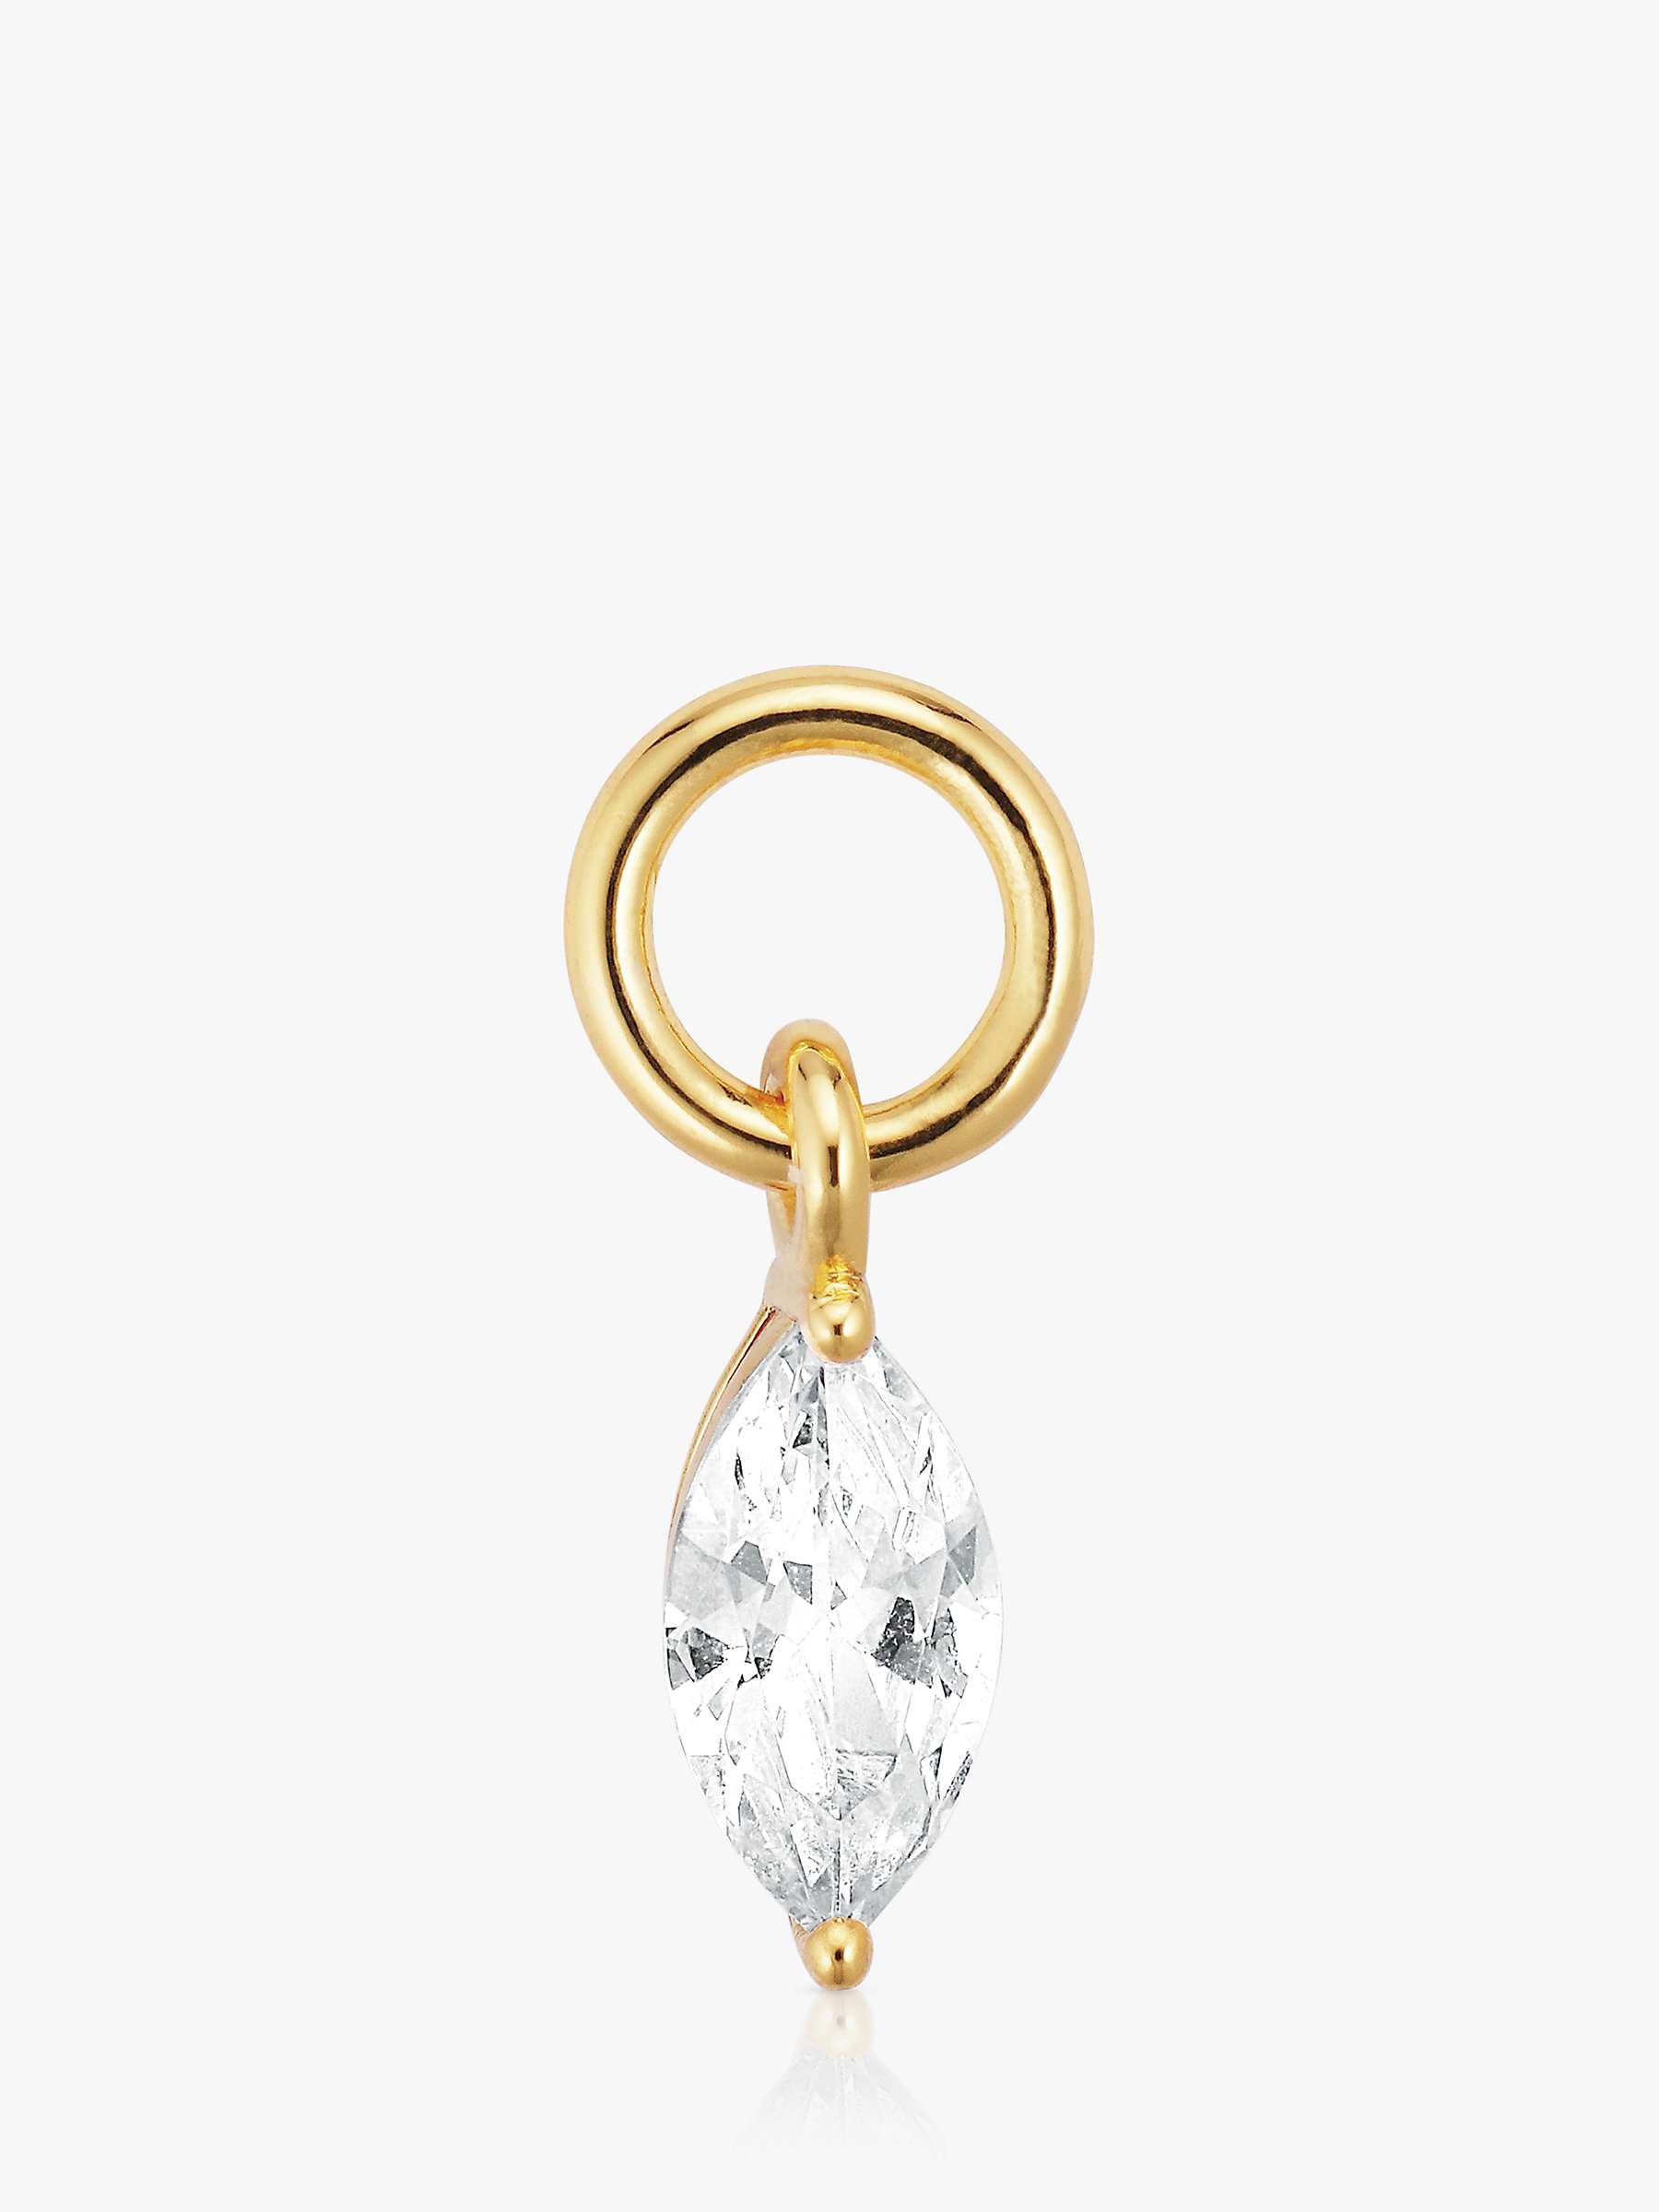 Buy Sif Jakobs Jewellery White Cubic Zirconia Charm, Gold Online at johnlewis.com